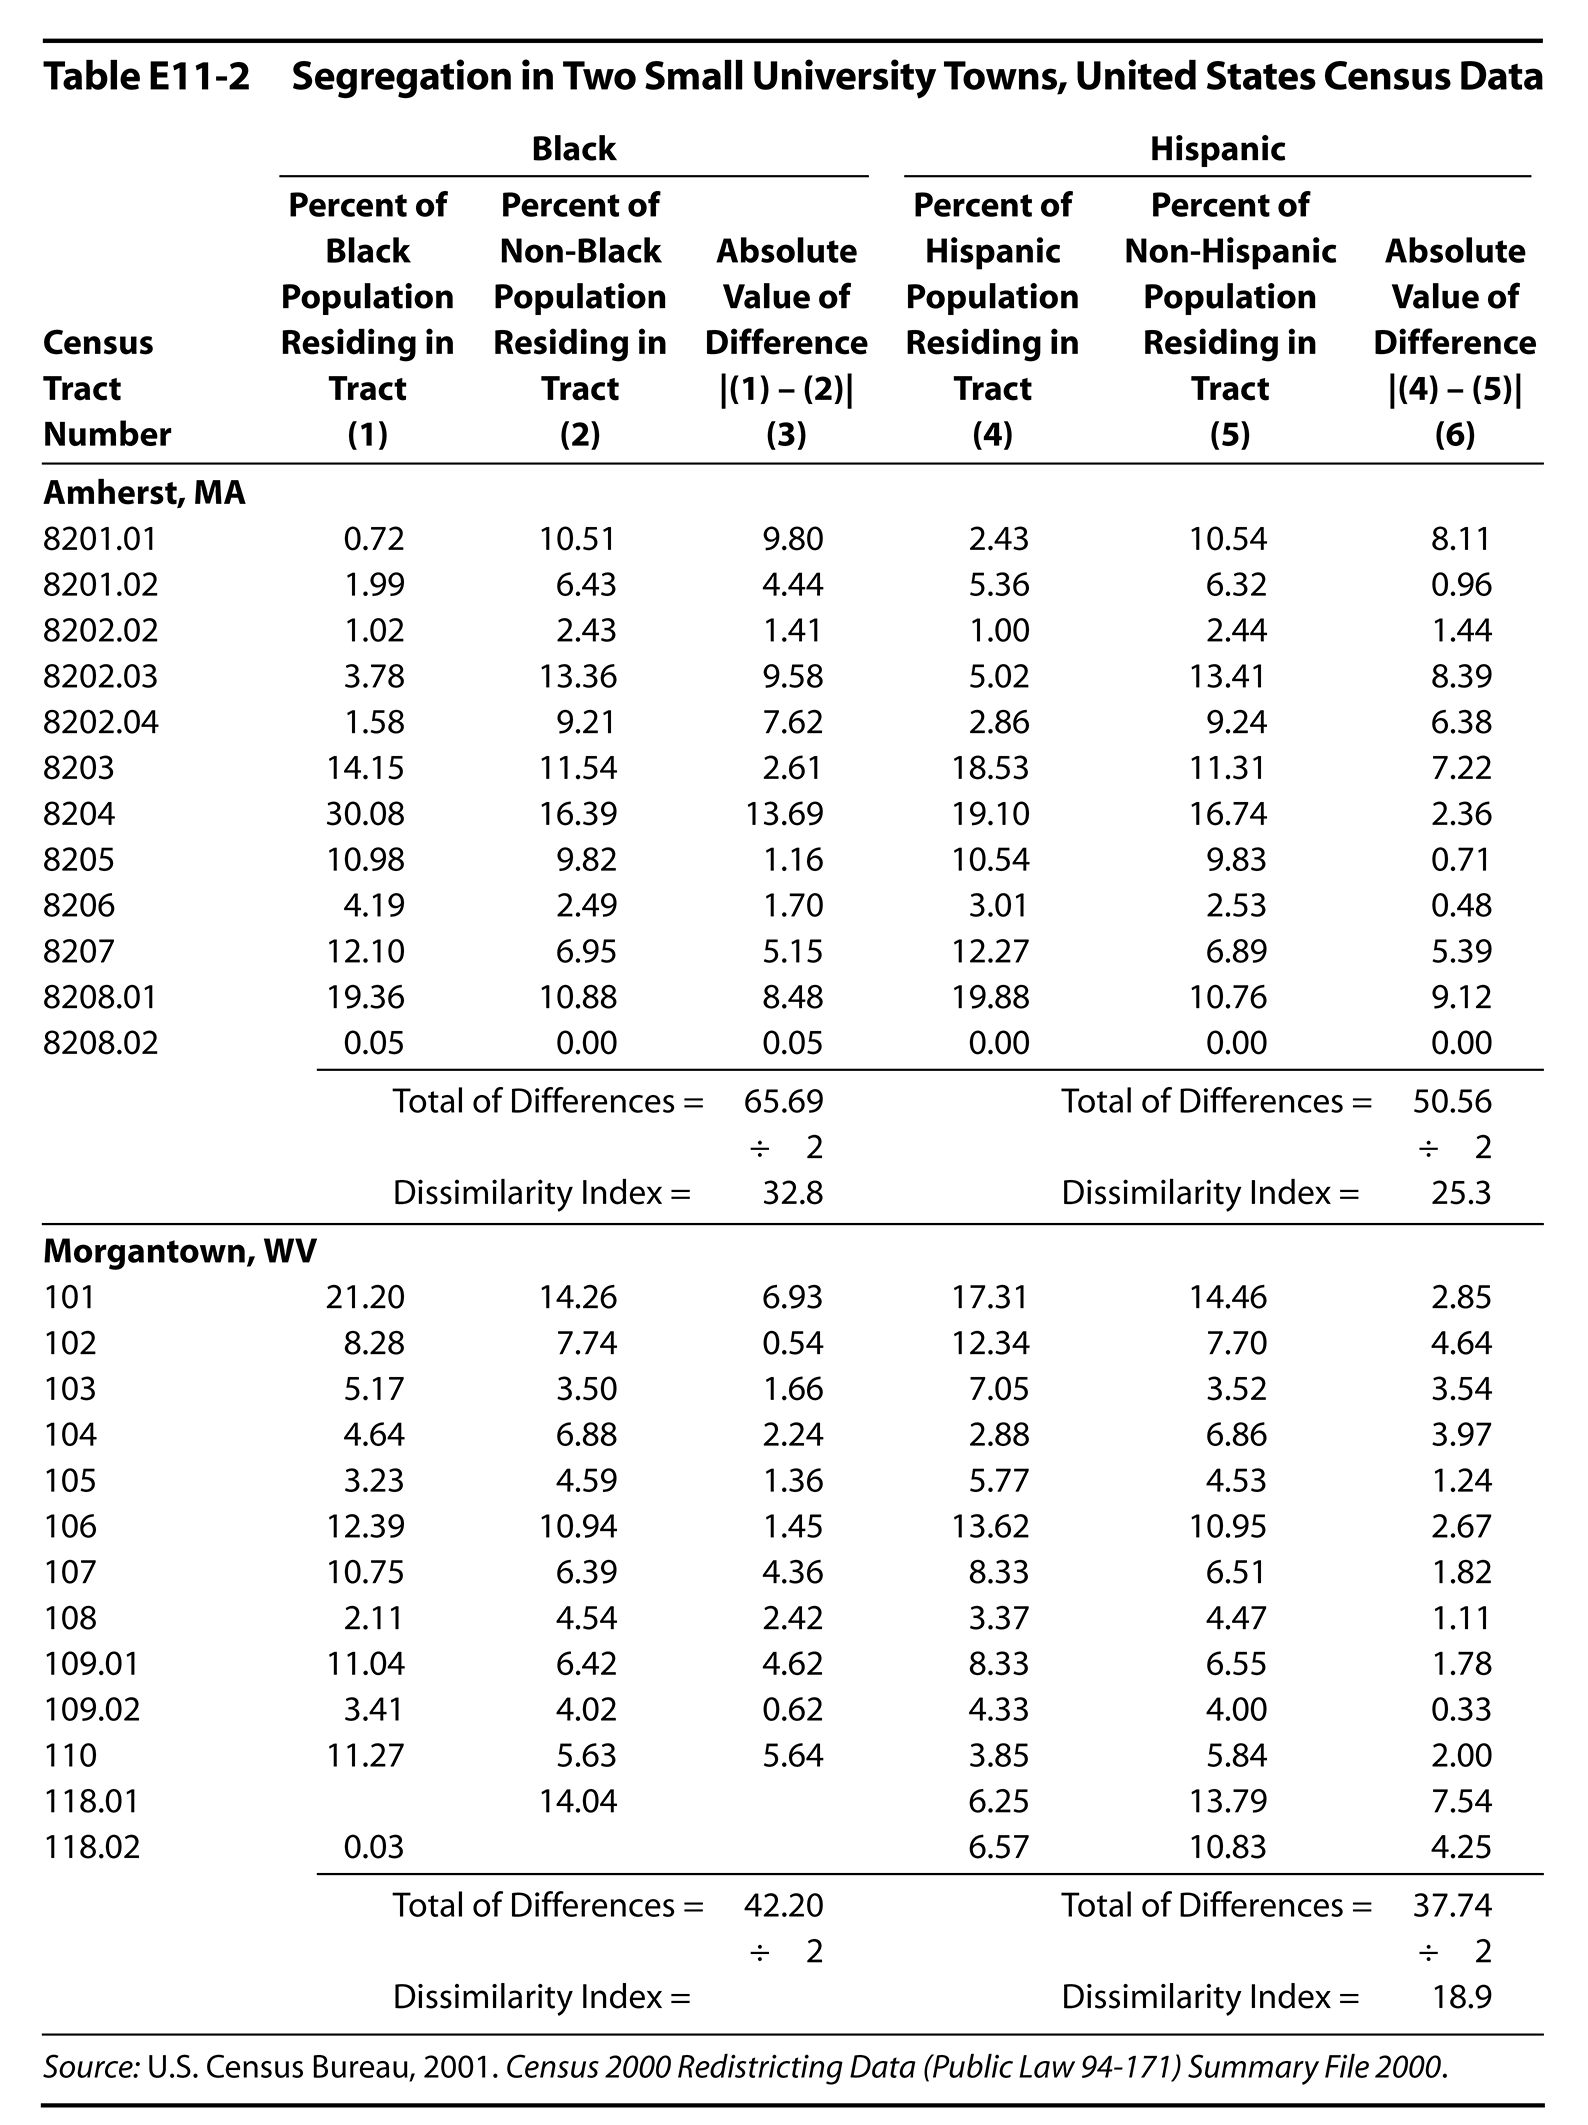 Table E11-2 Segregation in Two Small University Towns, United States Census Data